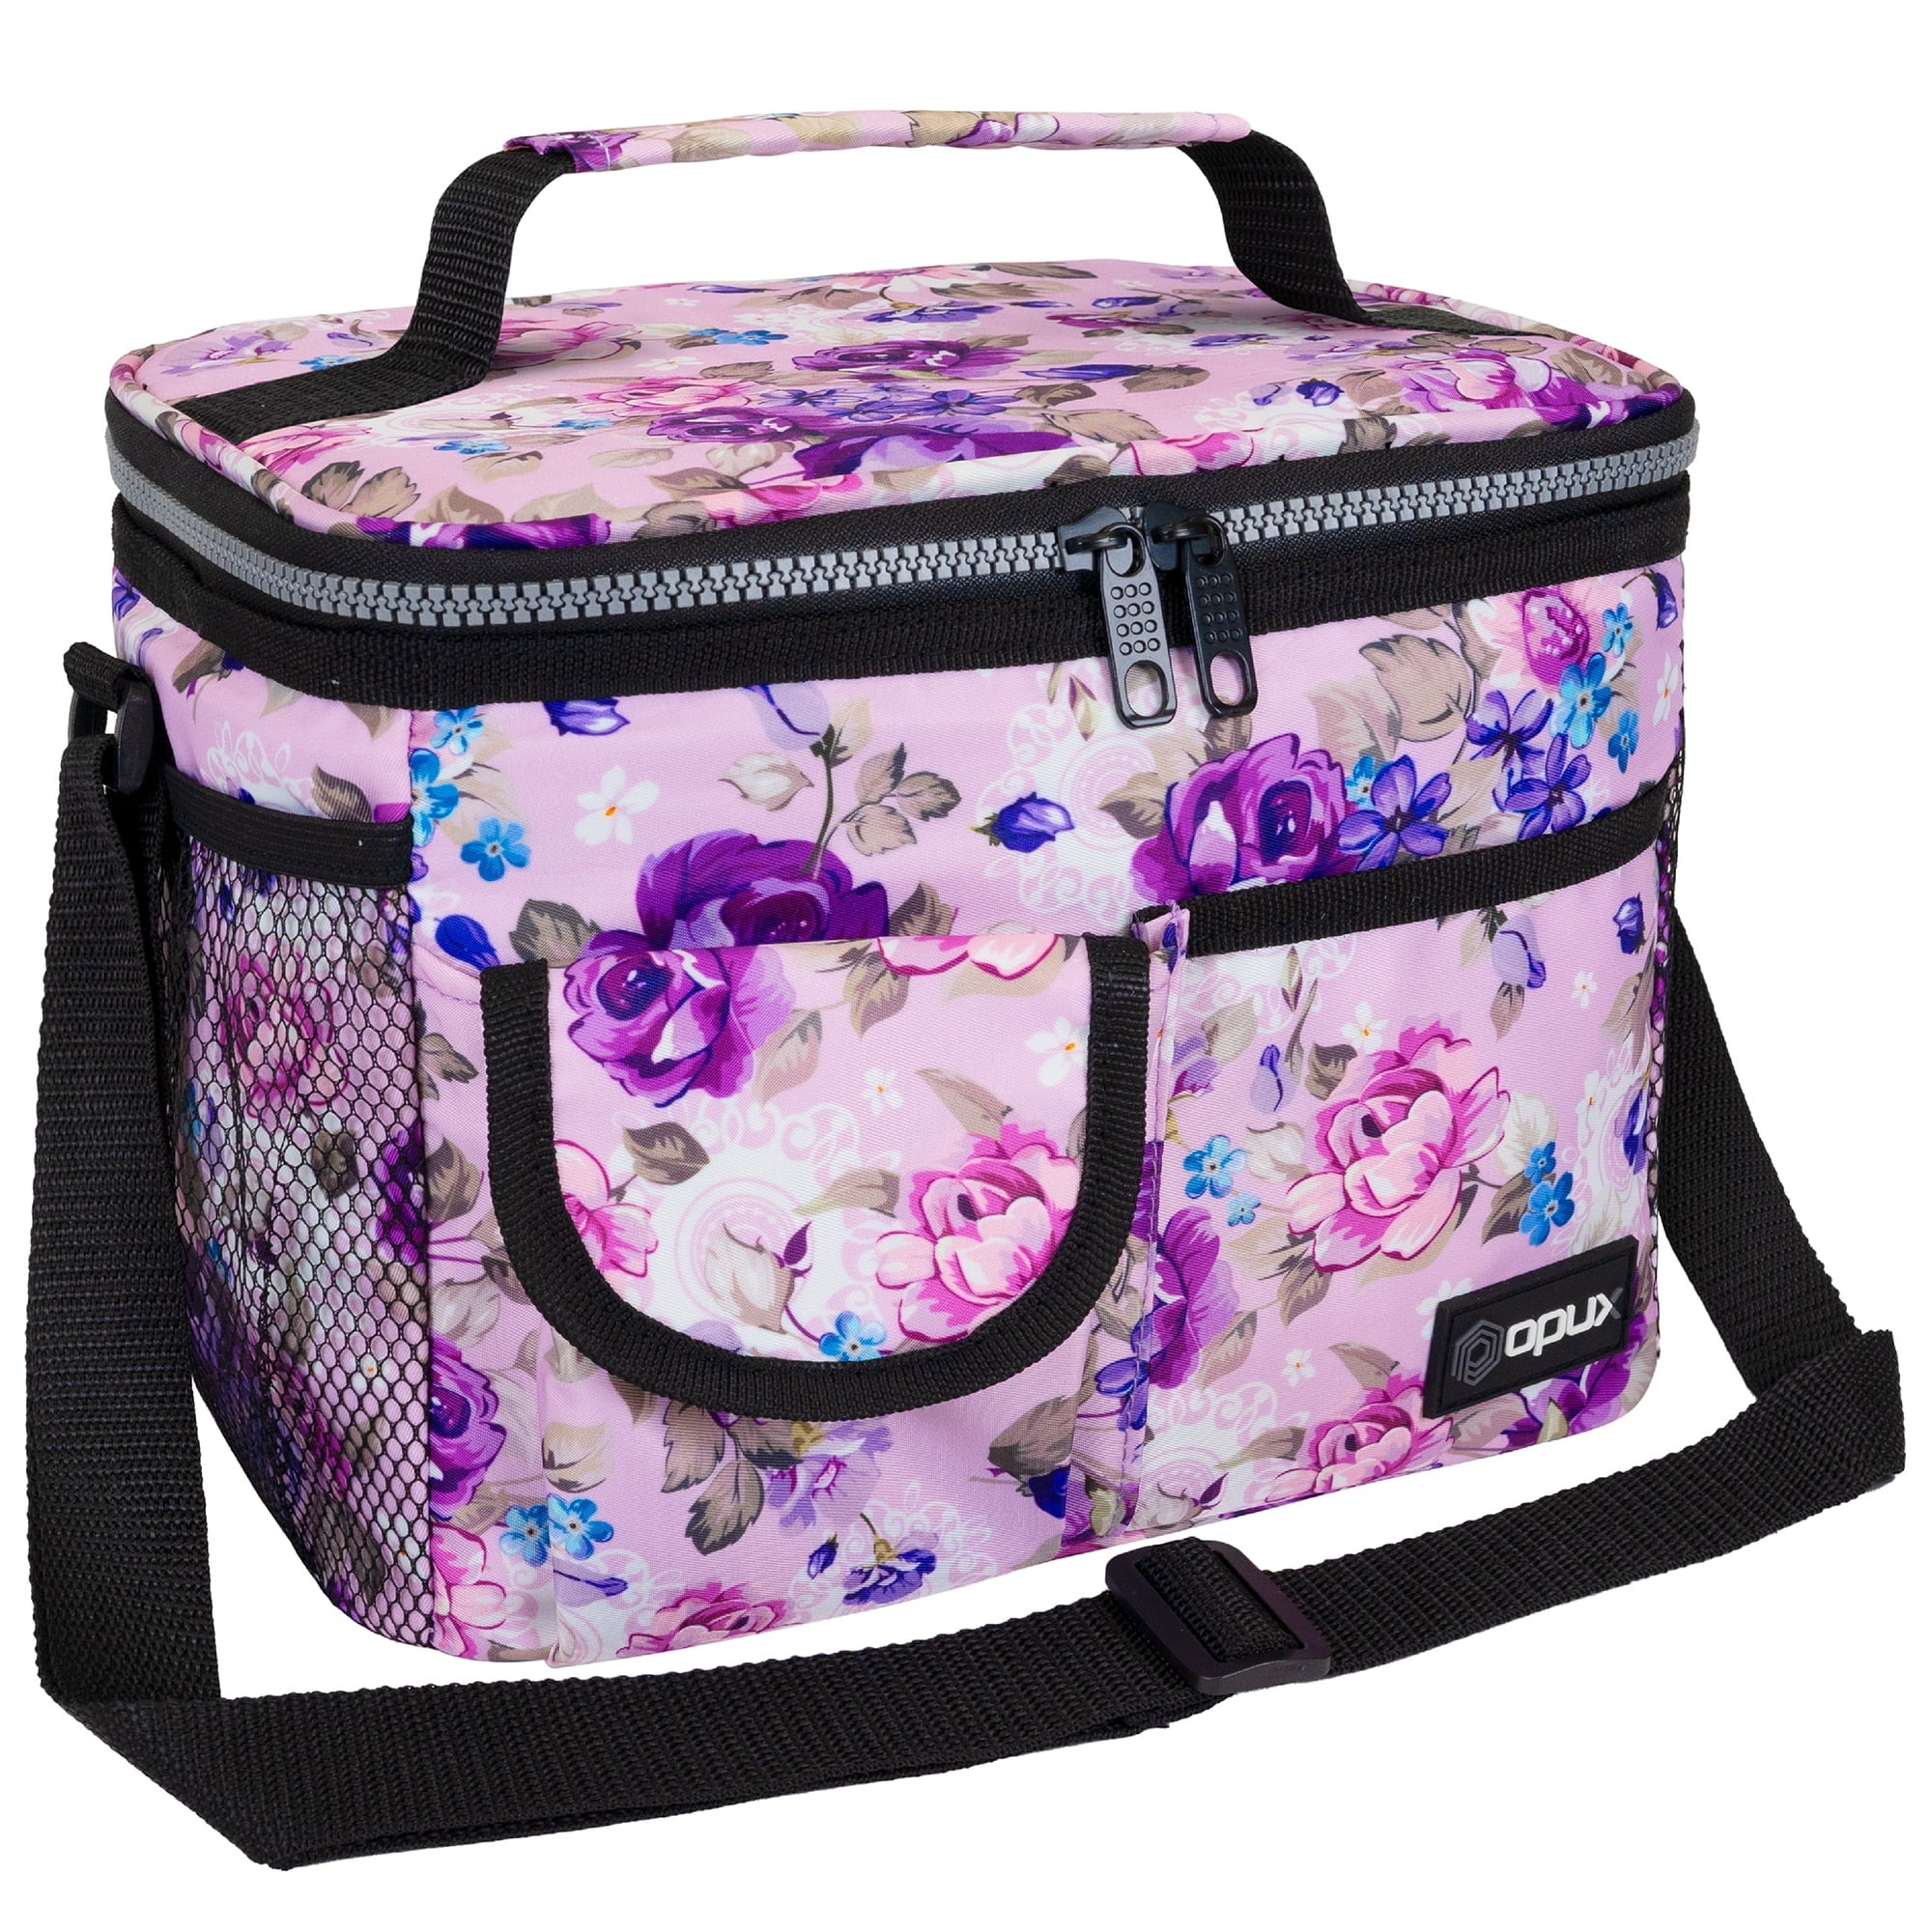 Childrens Named Back to School Lunch Box Bag Insulated Girls Boys Foil Lined NEW 